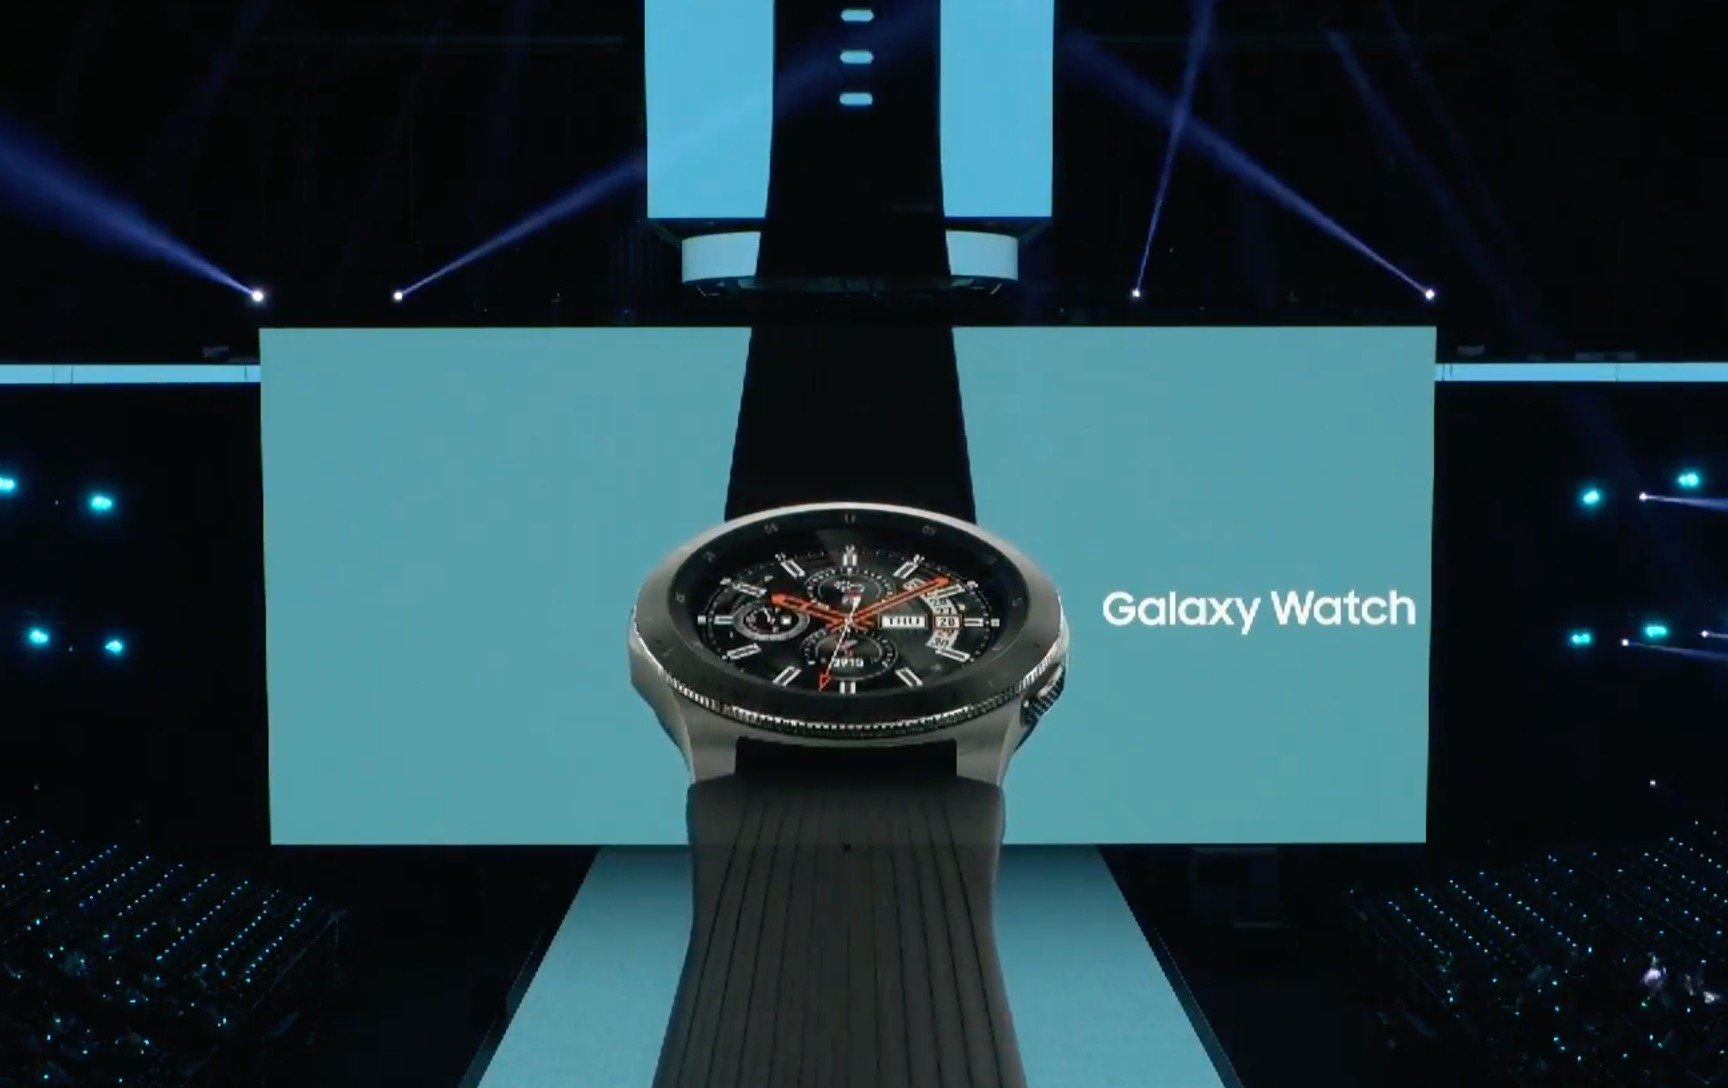 Samsung Galaxy Watch Release 5 Things You Need to Know